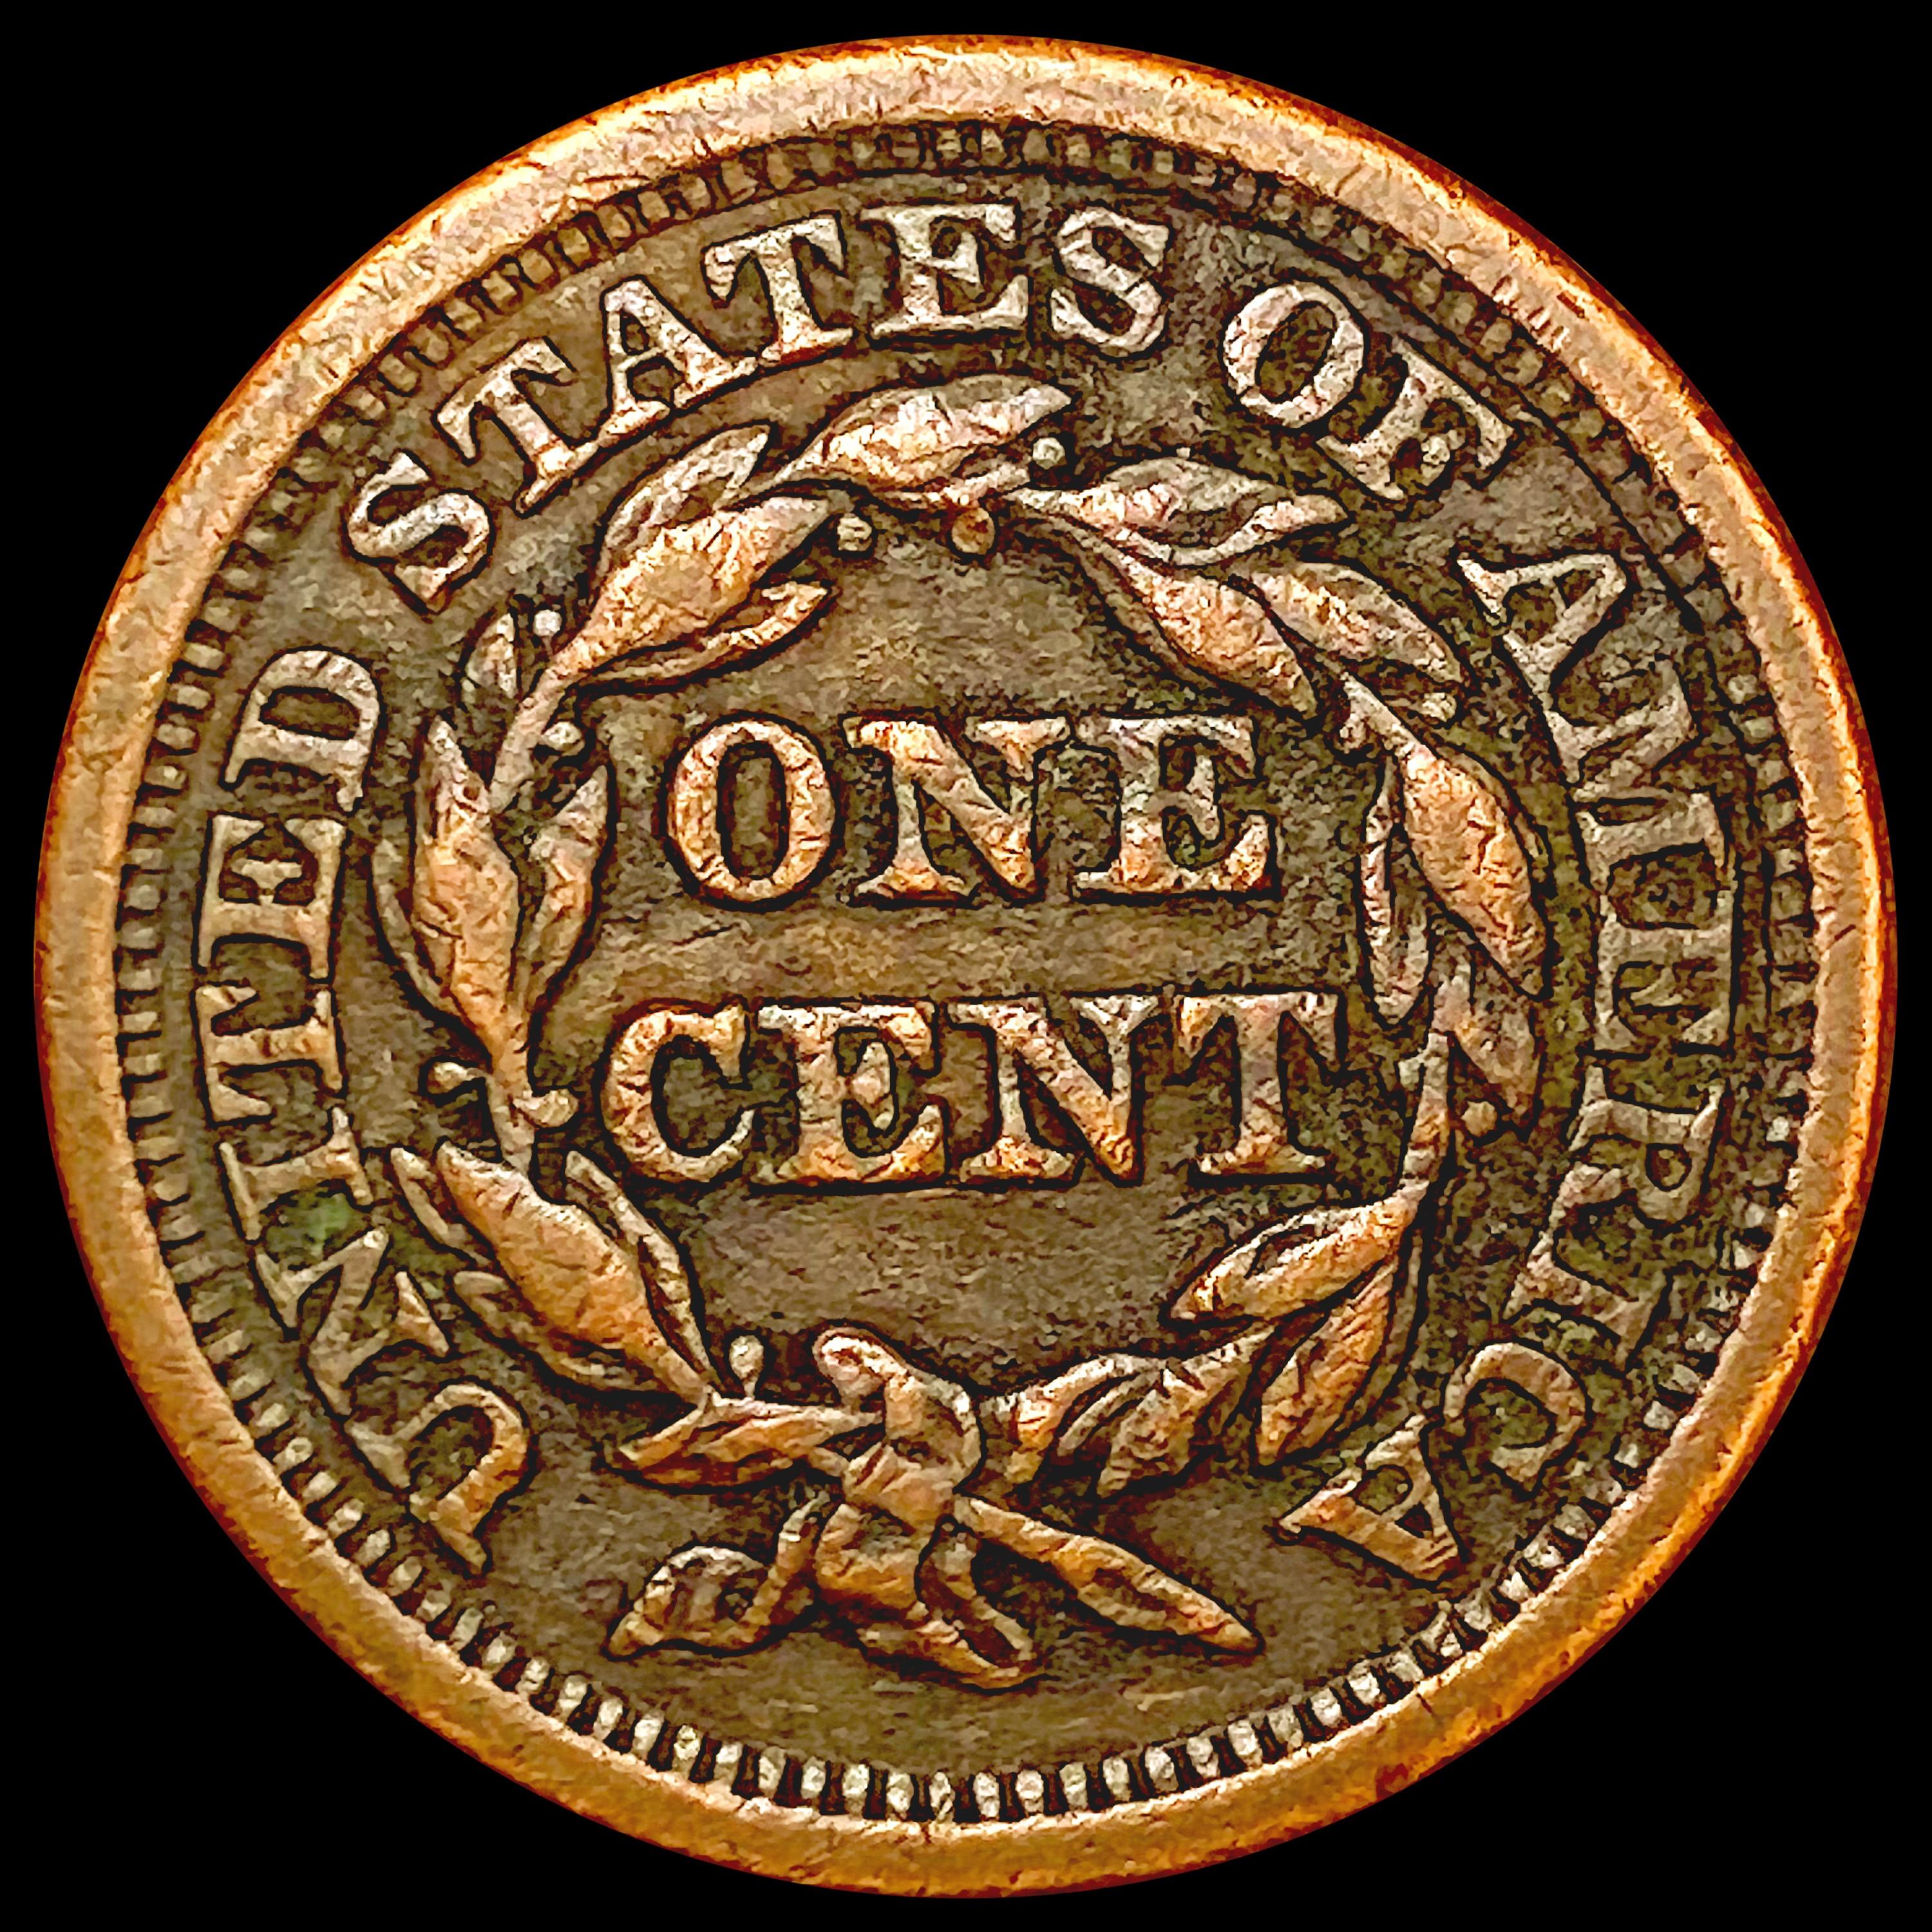 1848 Braided Hair Large Cent NEARLY UNCIRCULATED